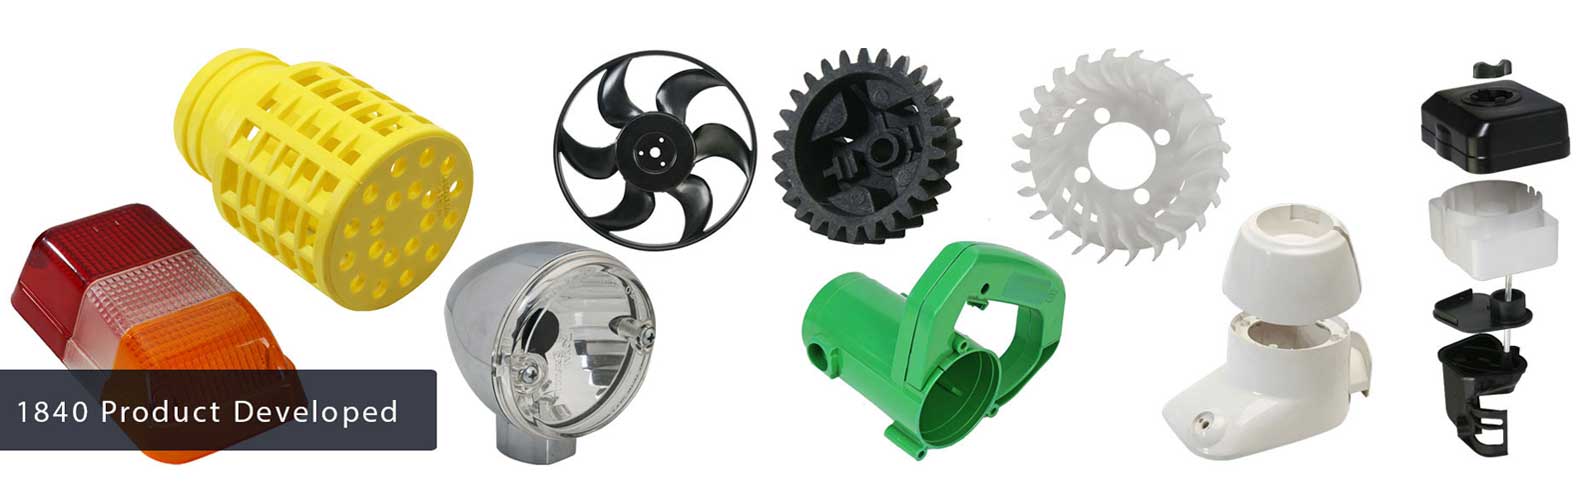 Plastic parts including gears, cooling fans, assemblies, head light & Plastic filters